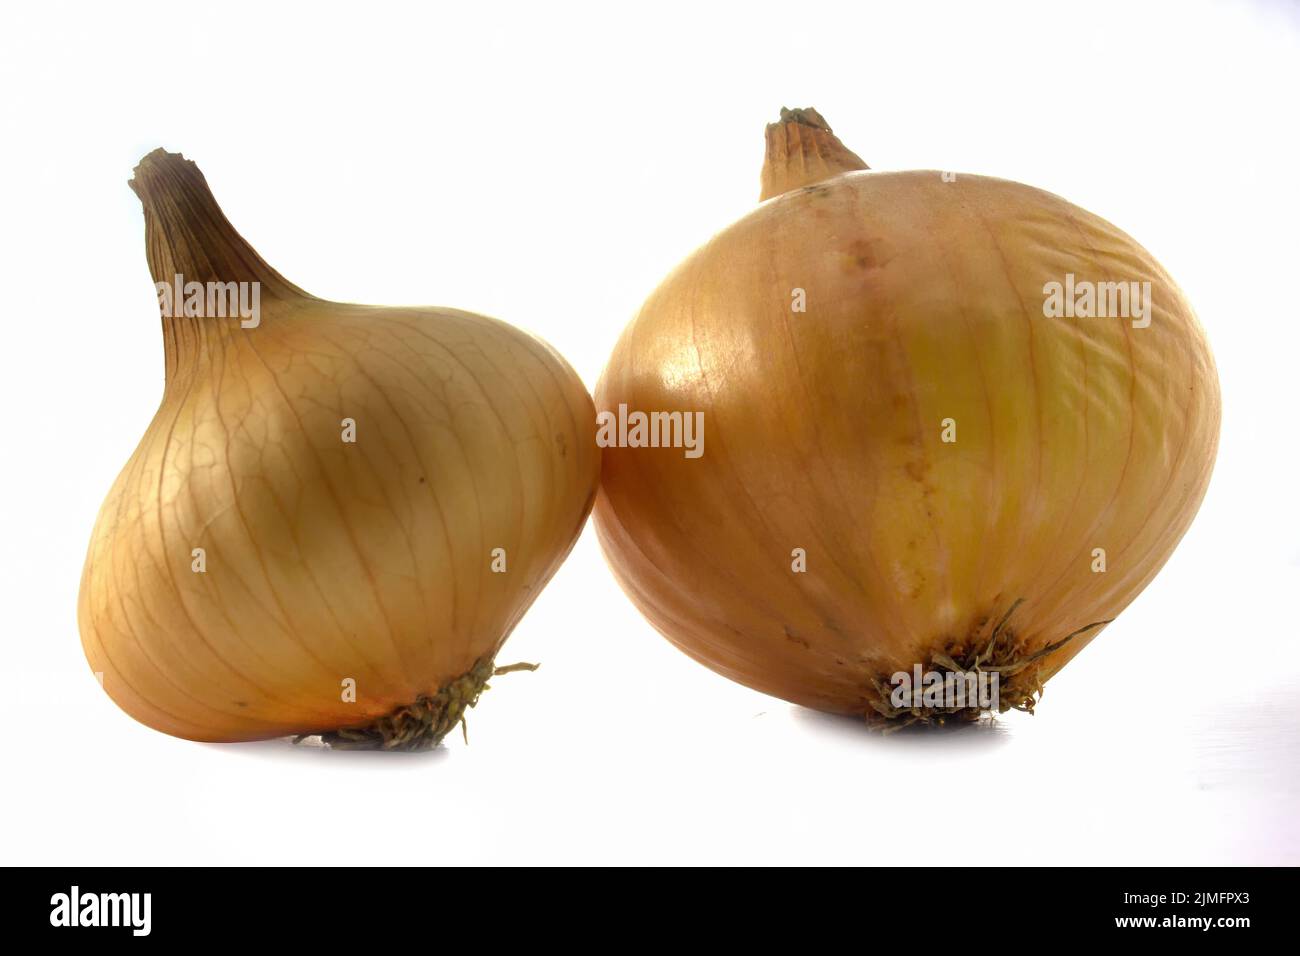 Onions isolated on white background. Whole fruits of vegetables Stock Photo